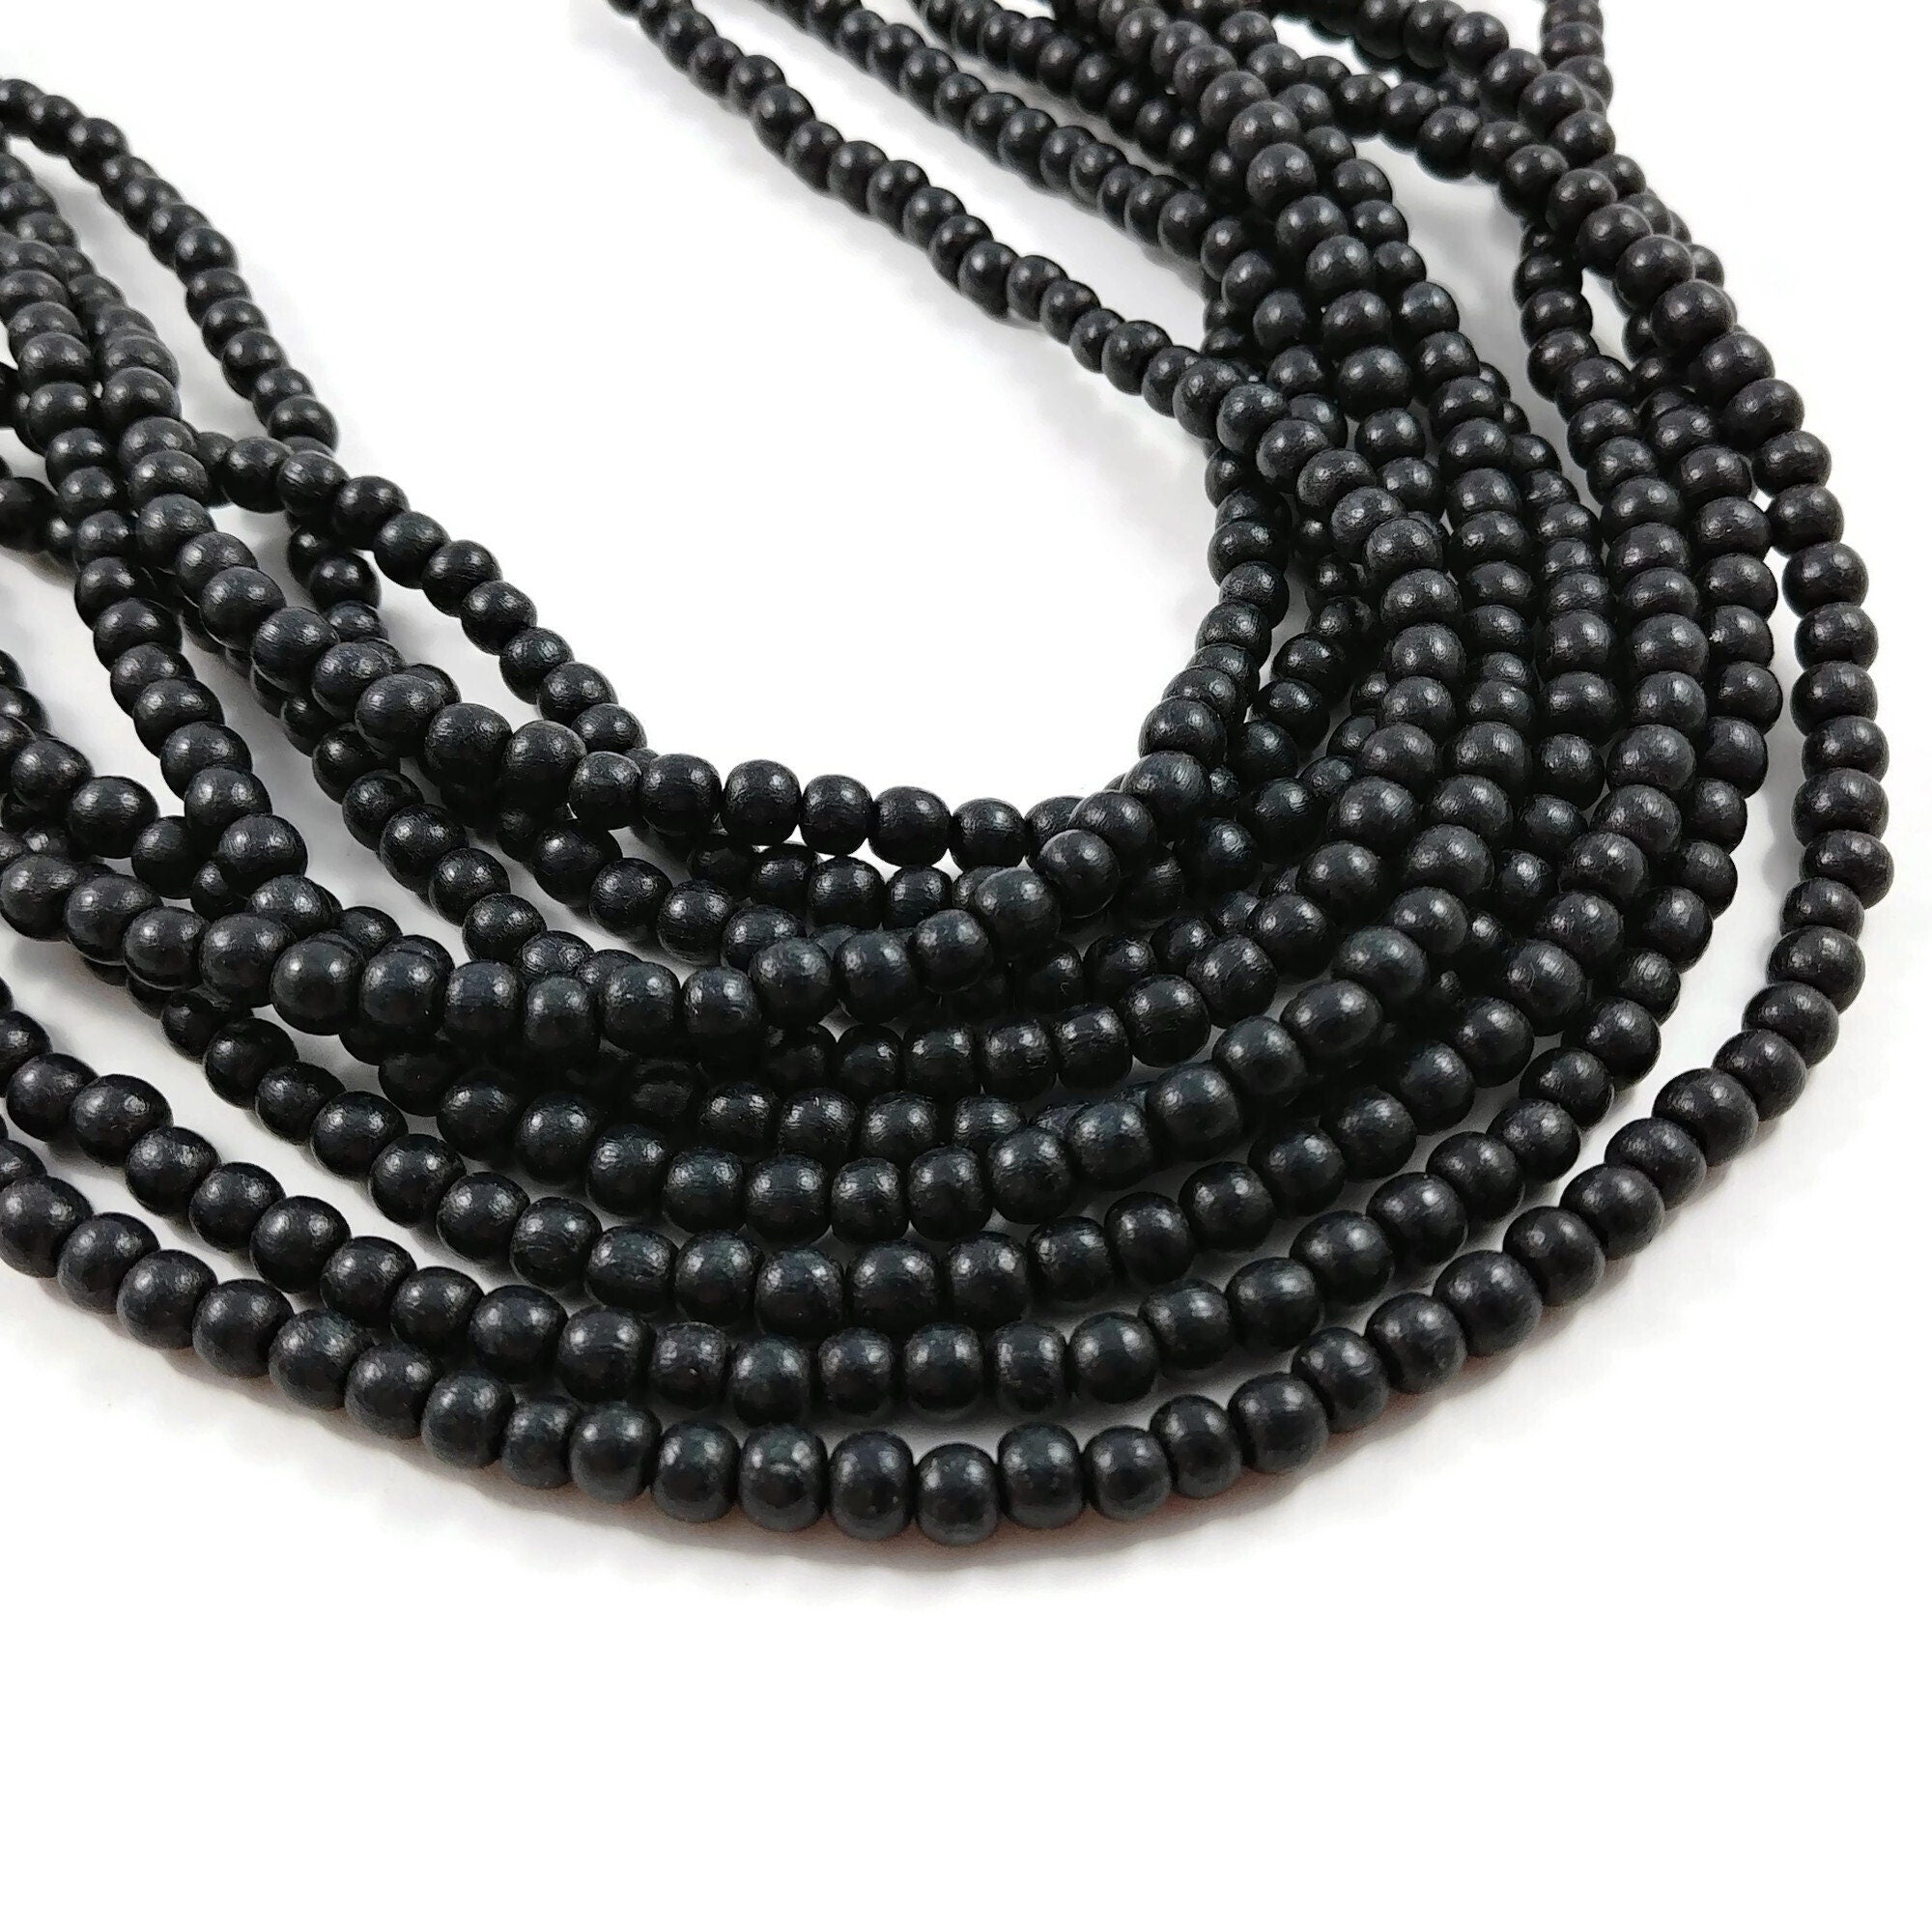 5mm black wood beads, 85pcs natural wooden beads, Round spacer beads for jewelry making